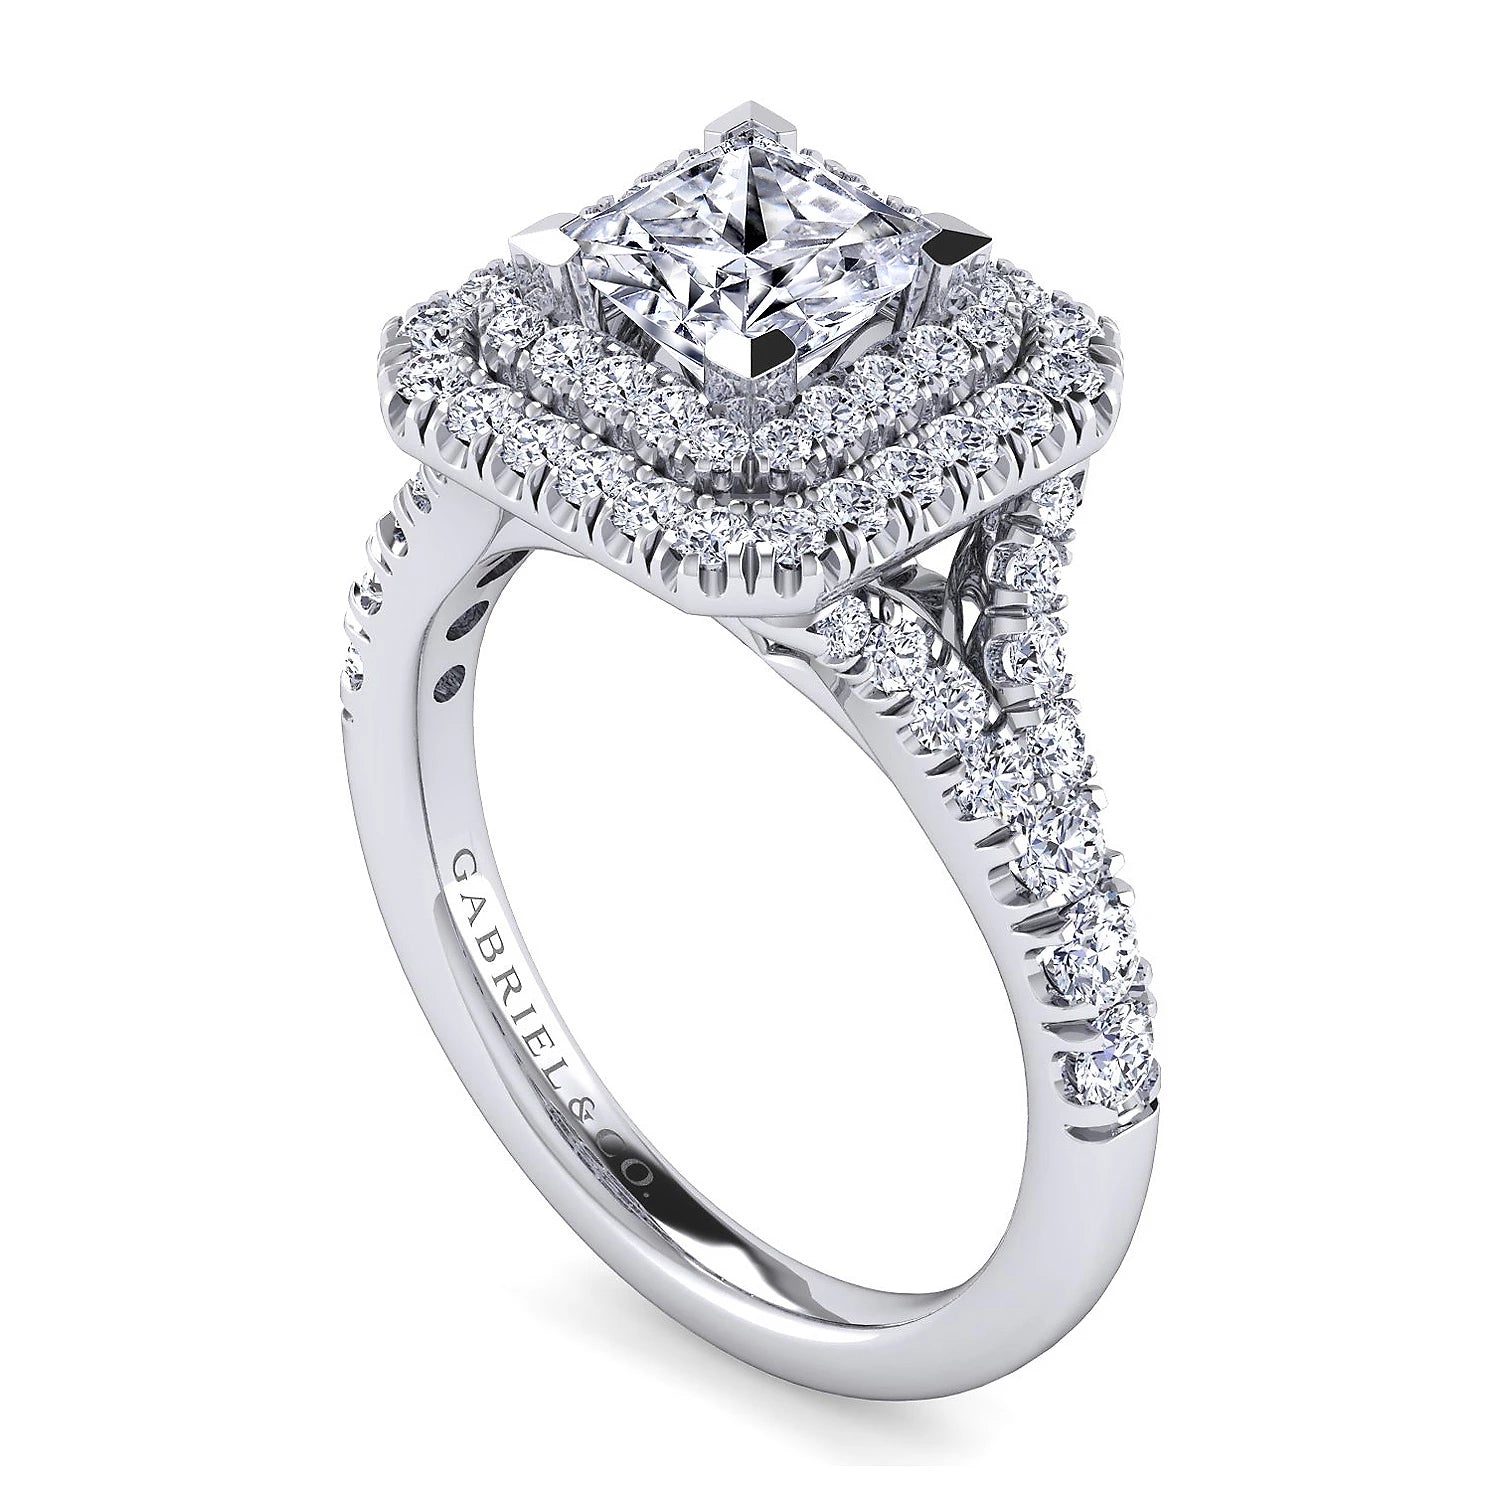 Moonstone Diamond Engagement Ring, Double Halo Ring with Intricate Fil -  Abhika Jewels